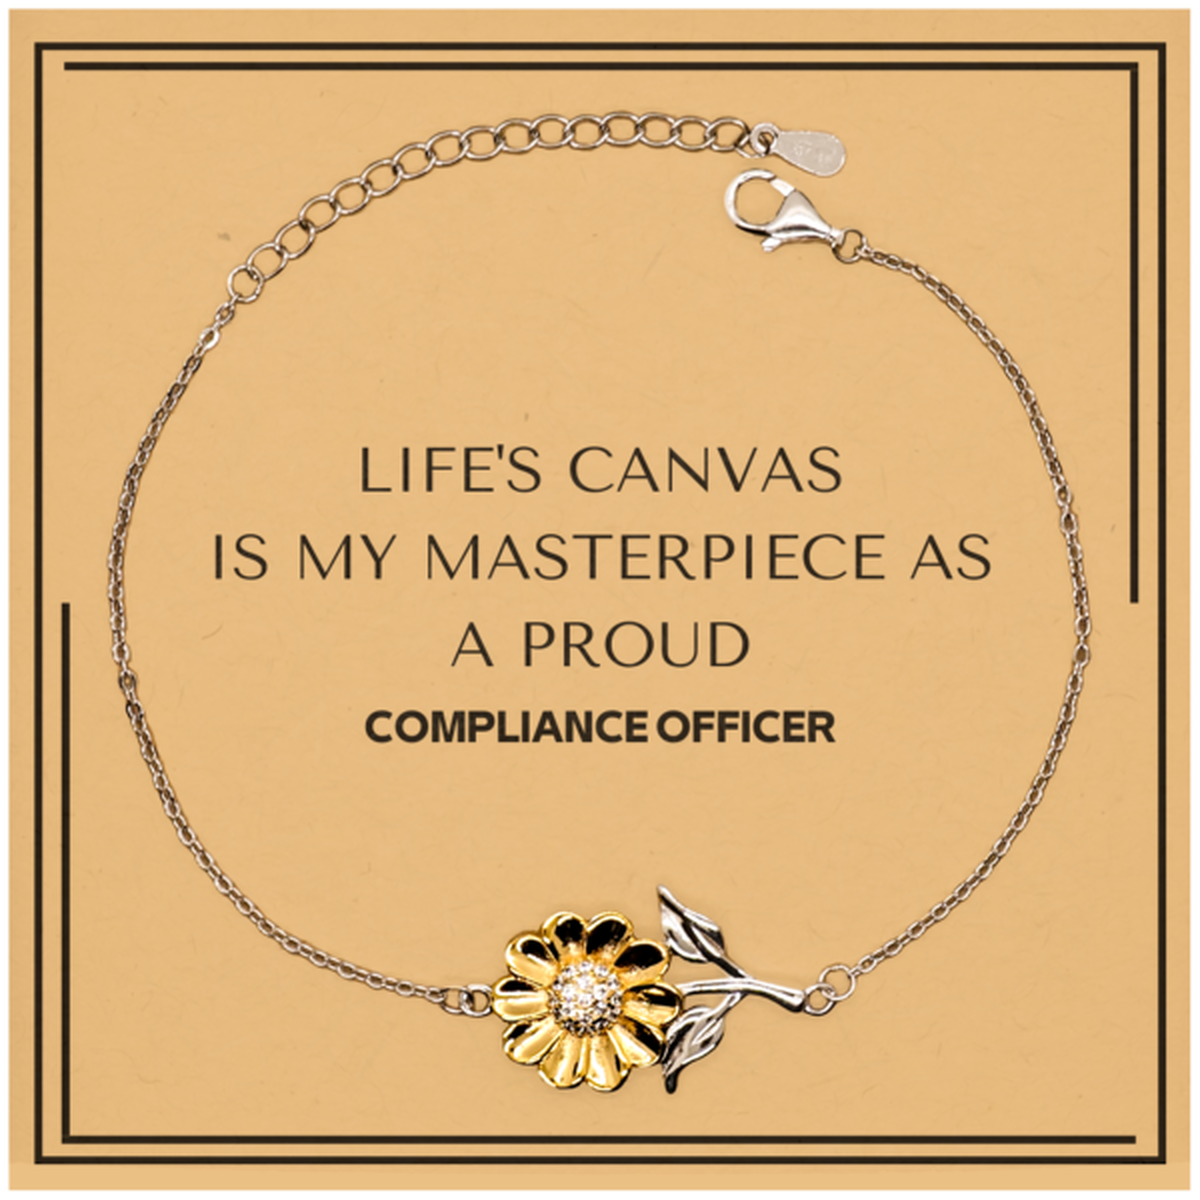 Proud Compliance Officer Gifts, Life's canvas is my masterpiece, Epic Birthday Christmas Unique Sunflower Bracelet For Compliance Officer, Coworkers, Men, Women, Friends